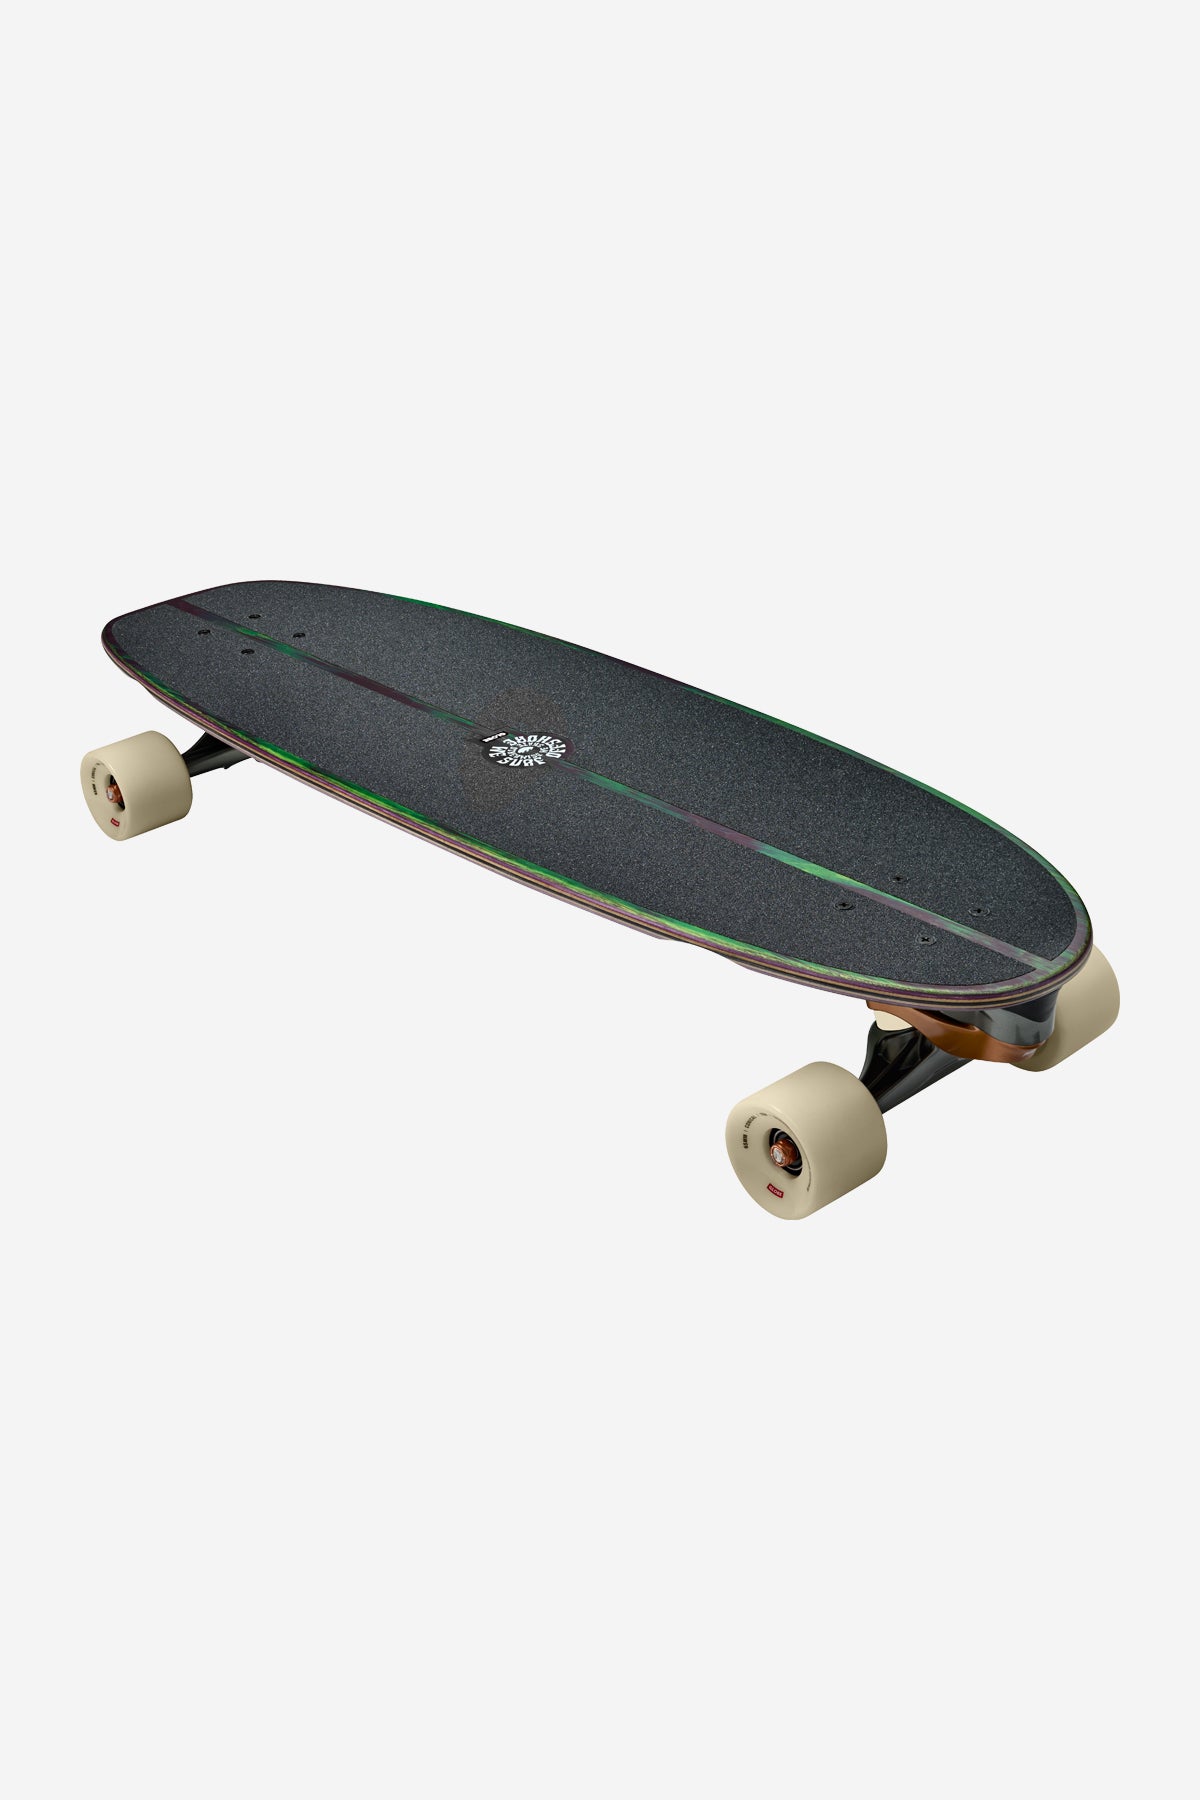 costa ss first out 31.5" surf skateboard